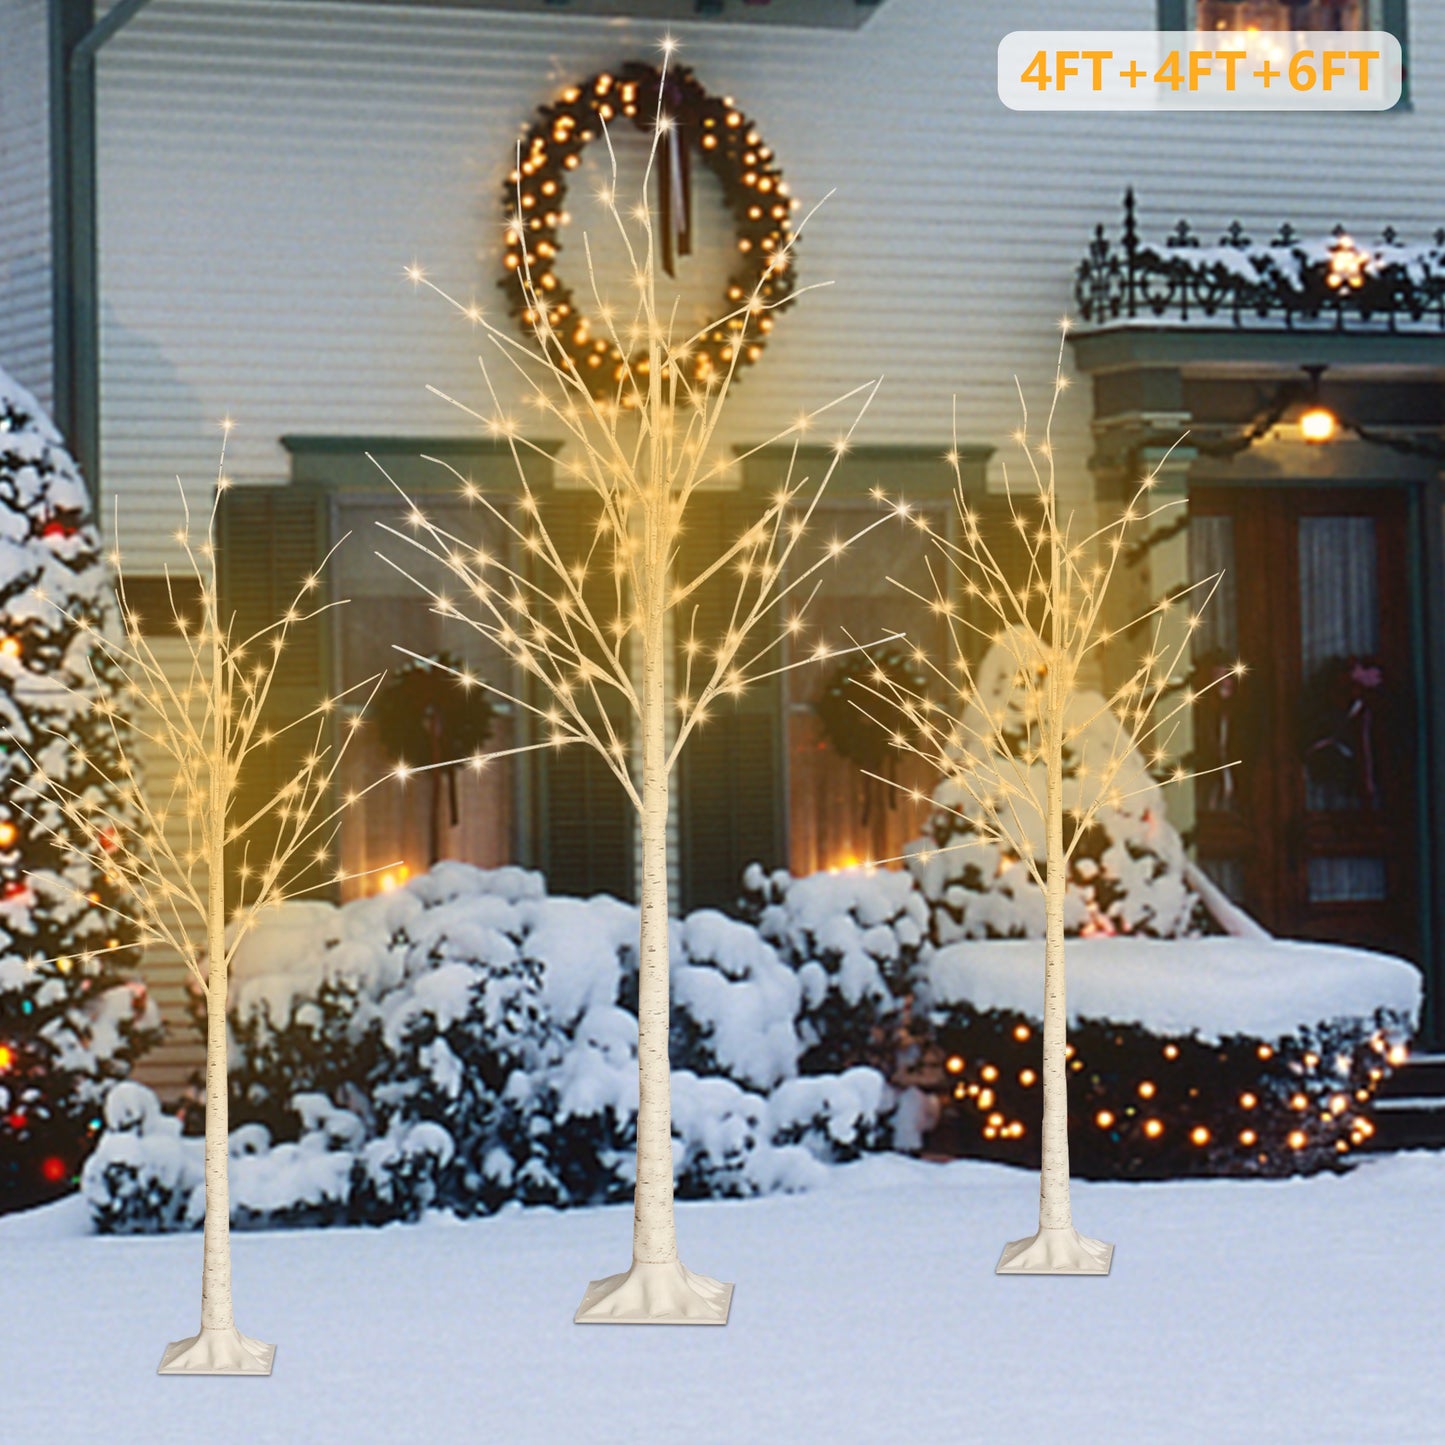 White Birch Trees, Set of 3, 4ft, 4ft and 6ft, SYNGAR Christmas Tree with LED Lights, Lighted Trees for Christmas Decoration, Home, Garden, Wedding, Festival Party, Indoor & Outdoor, Warm White, D4008